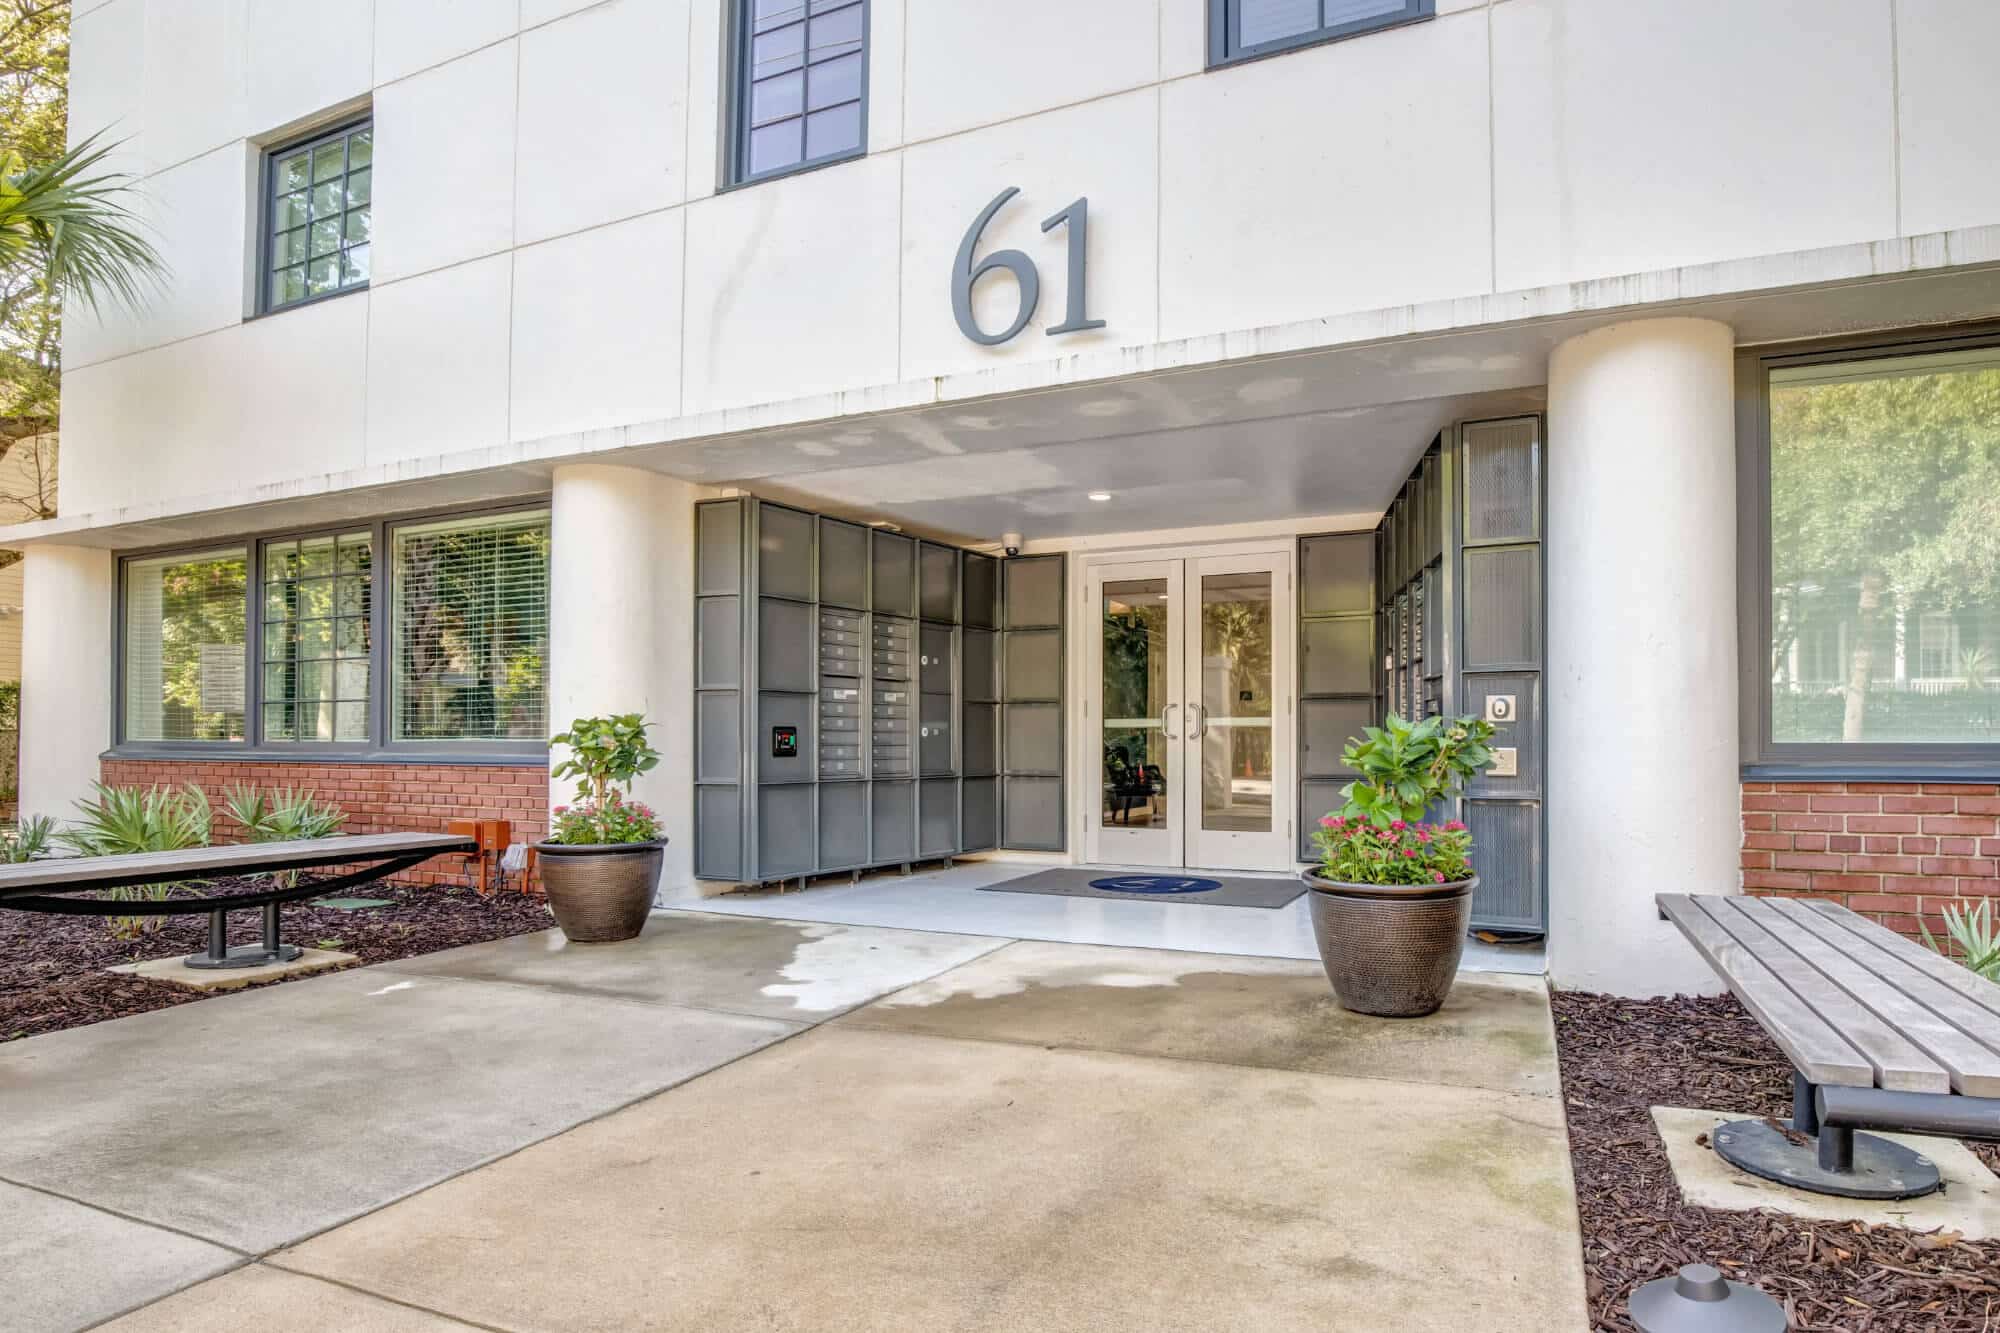 61 vandy off campus apartments near the college of charleston c of c building exterior main entrance